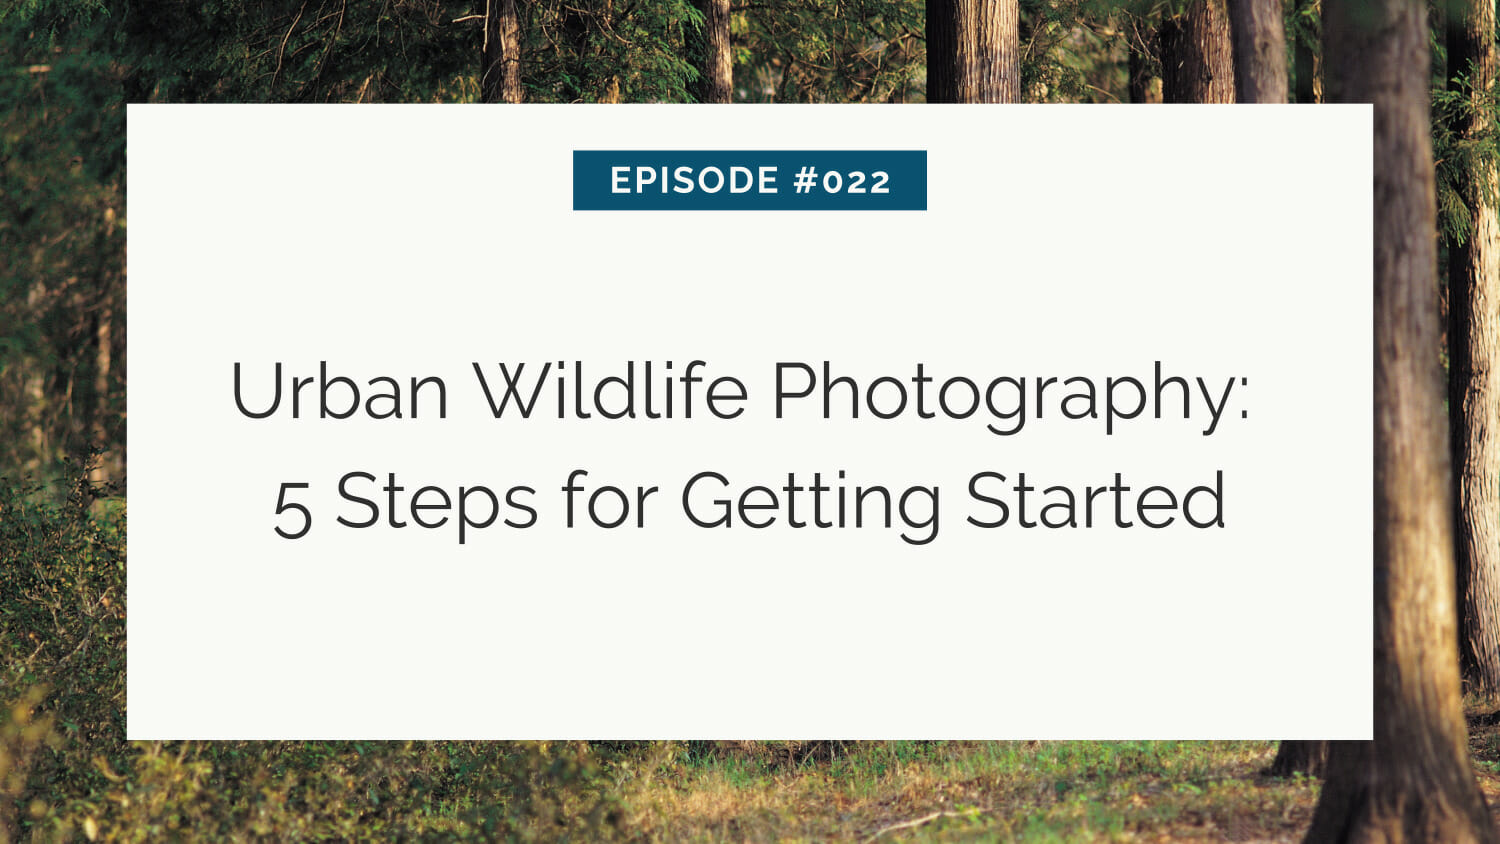 Title slide for an episode on urban wildlife photography tips.